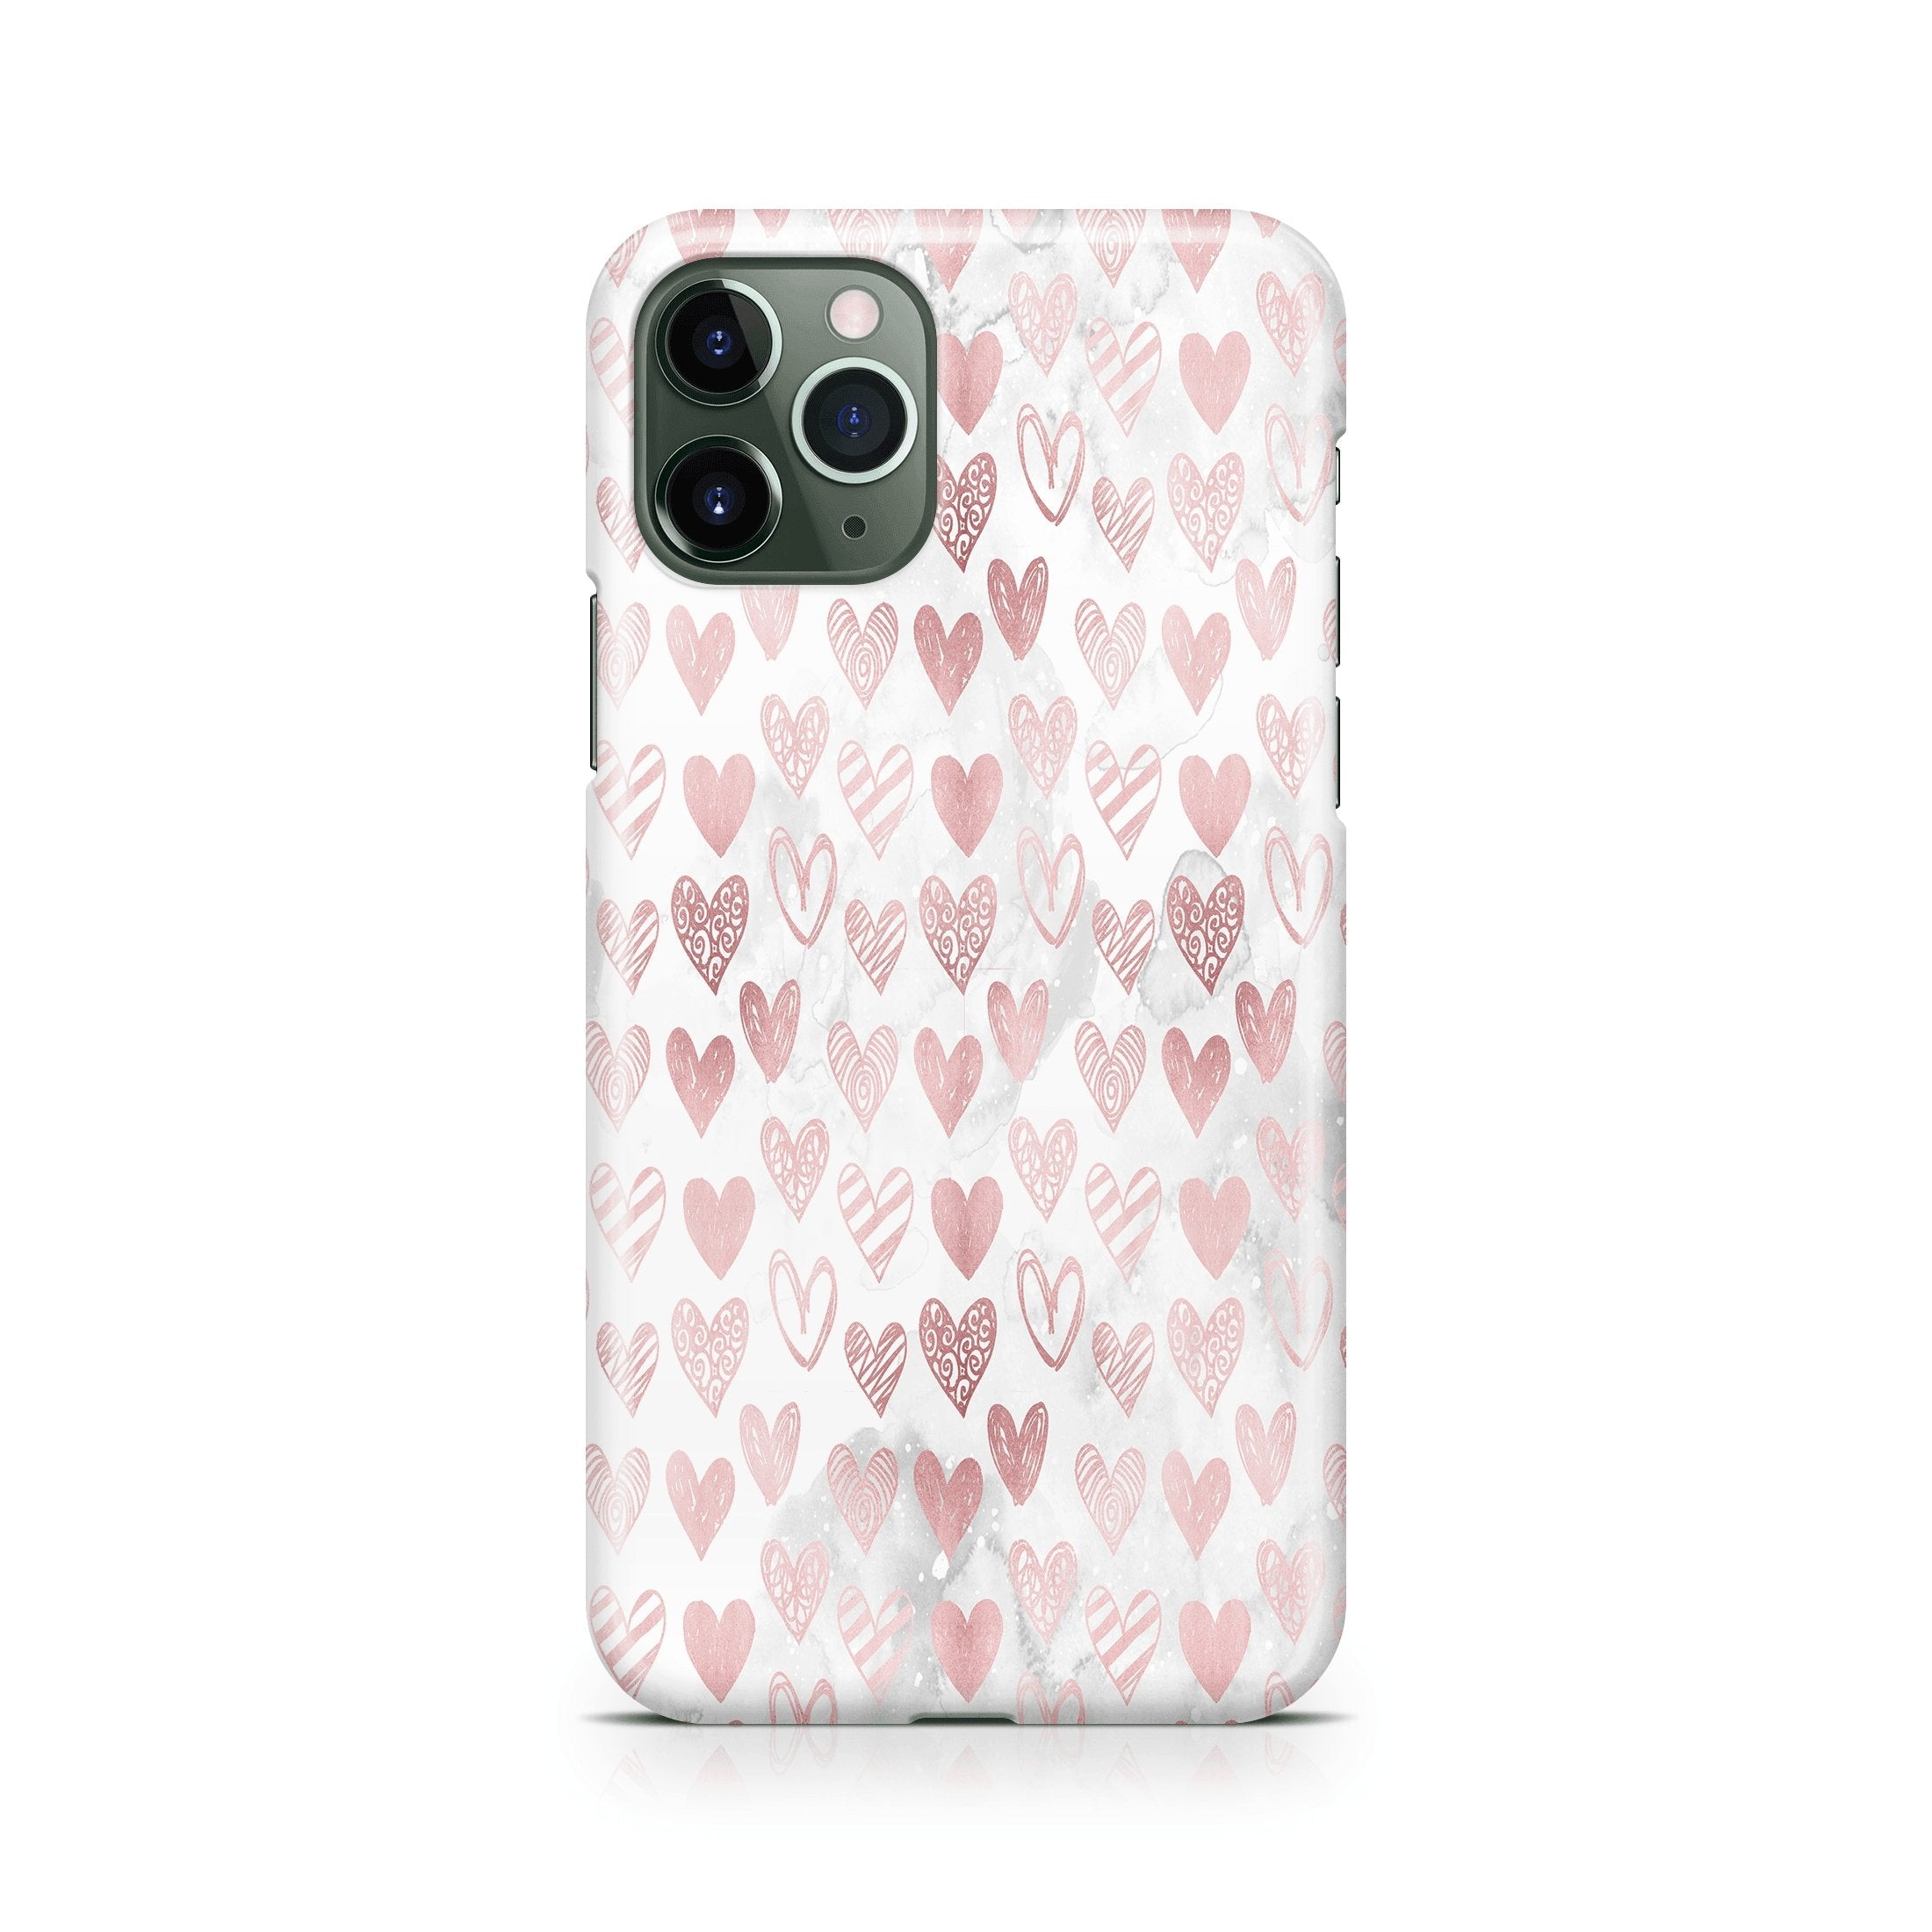 Pink Heart - iPhone phone case designs by CaseSwagger